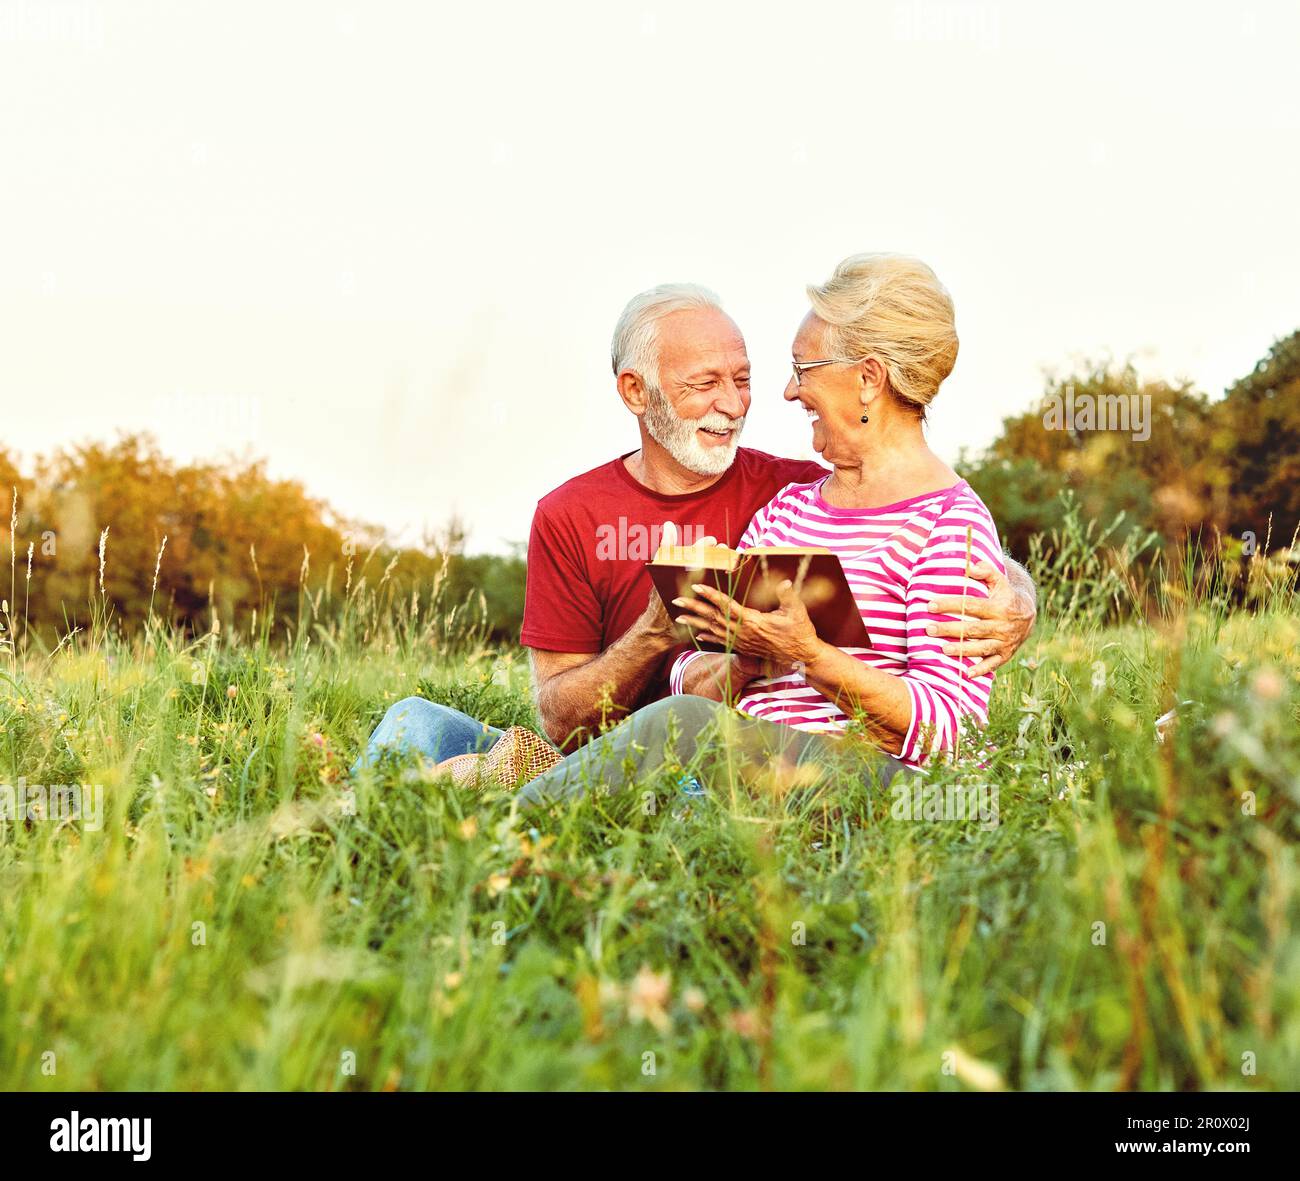 woman man outdoor senior couple happy lifestyle retirement together smiling love reading nature book Stock Photo